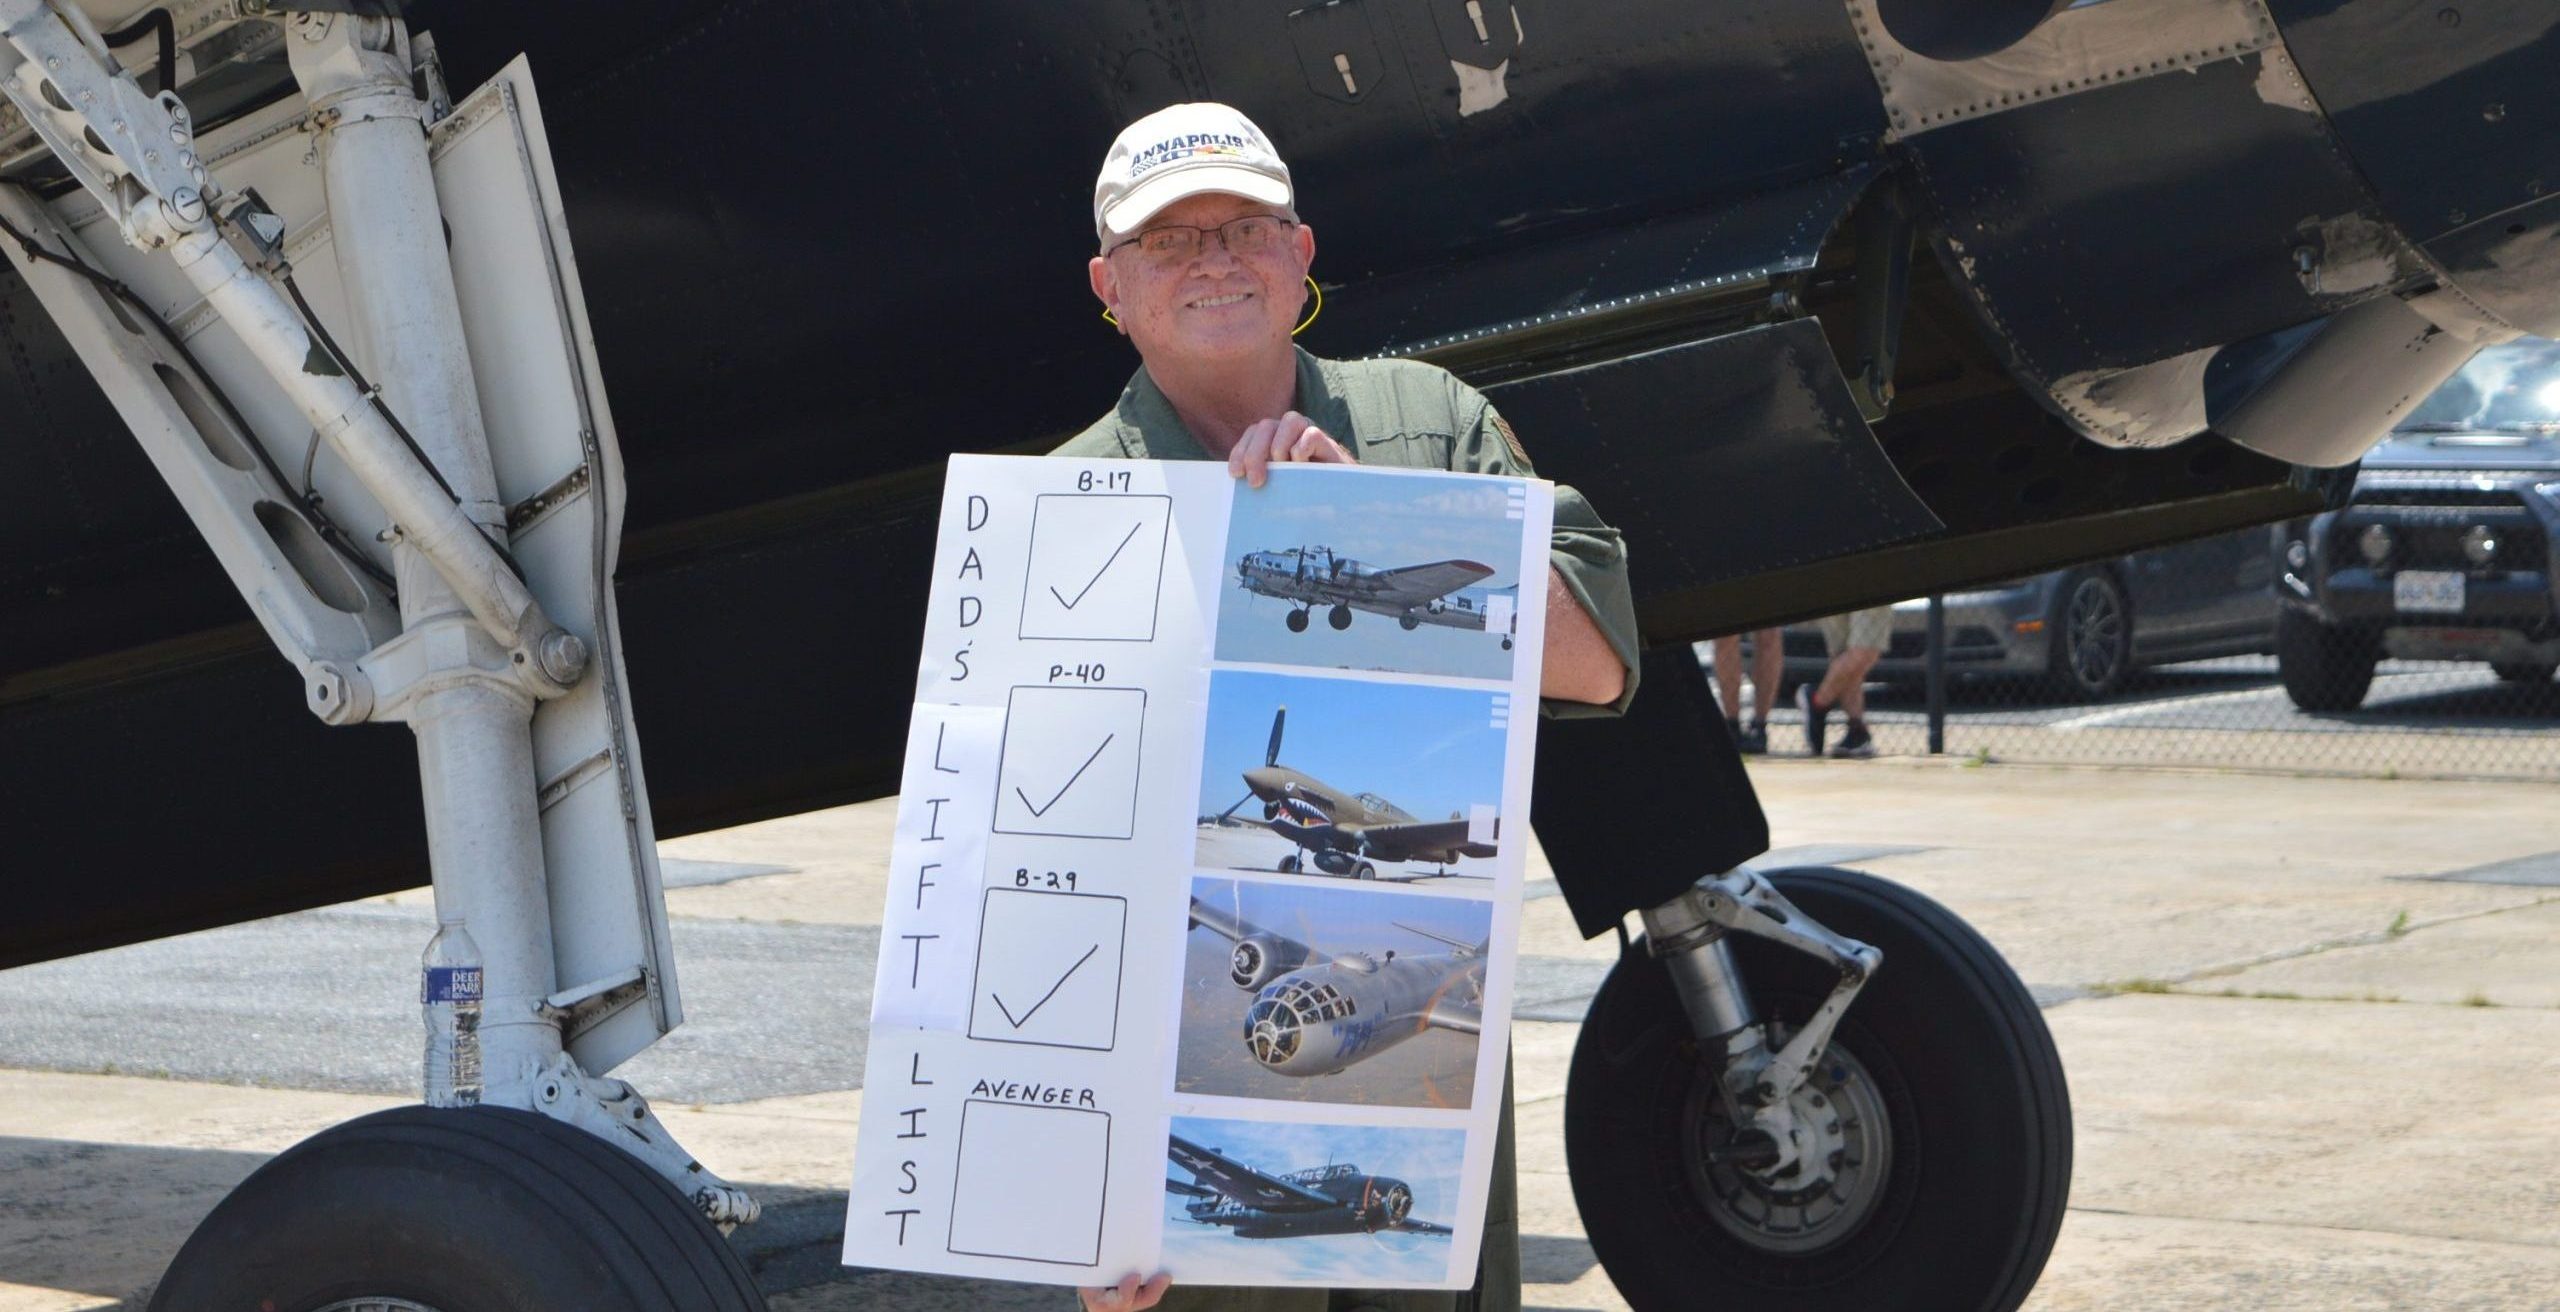 Warbirds Showcase: Marylander Thomas Dembeck shows off his "Lift List" before boarding the TBM Avenger "Doris Mae" at the 2021 Commemorative Air Force Warbirds Showcase in Frederick, MD. (credit Anthony C. Hayes/BPE)